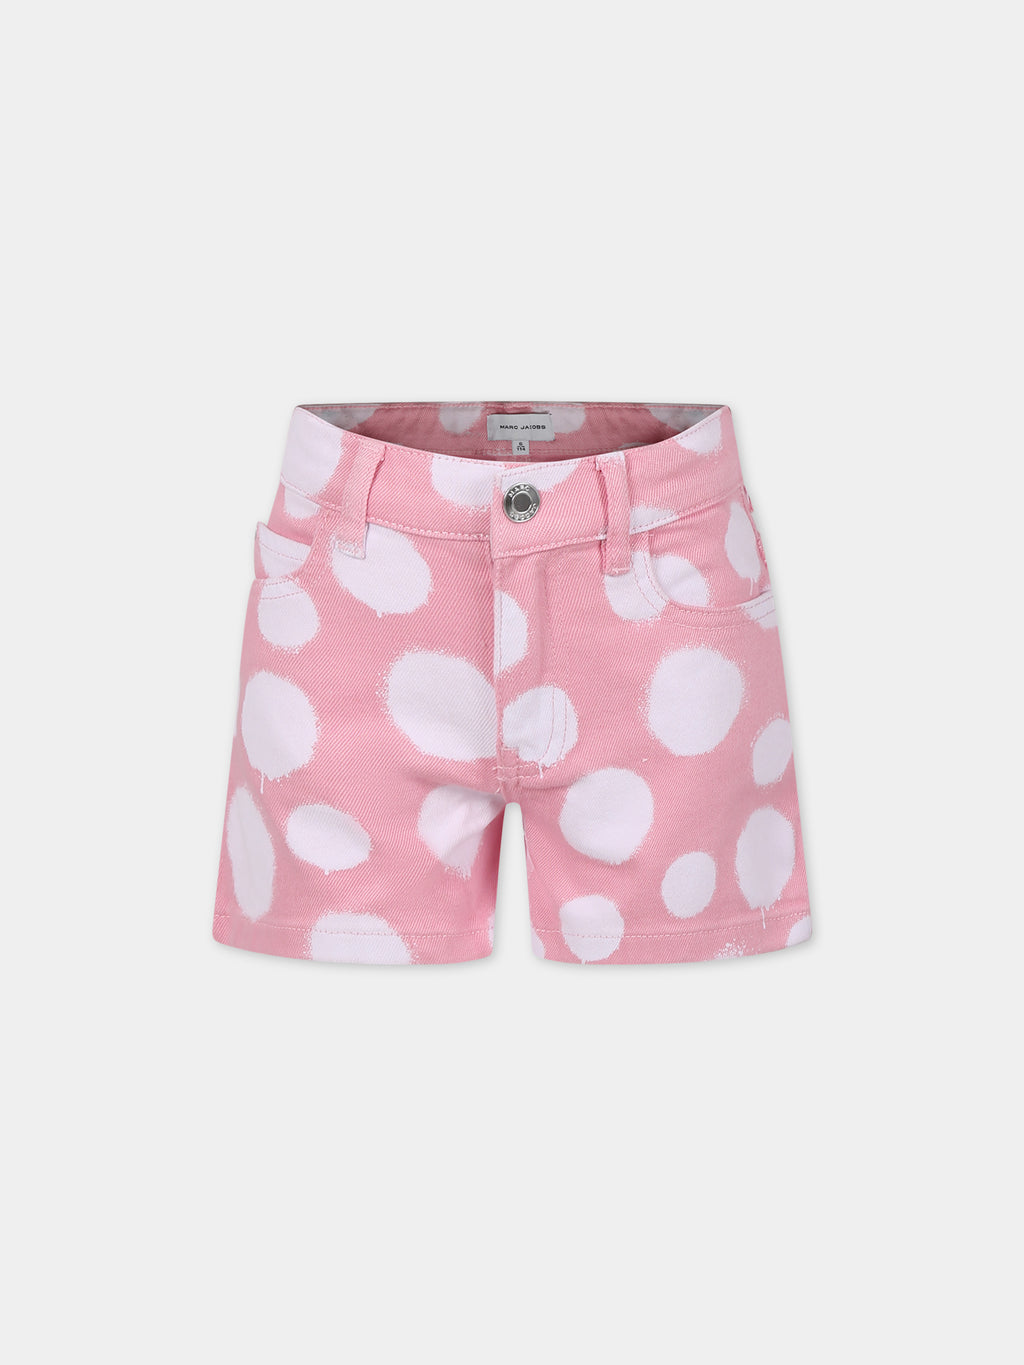 Pink shorts for girl with all-over polka dots